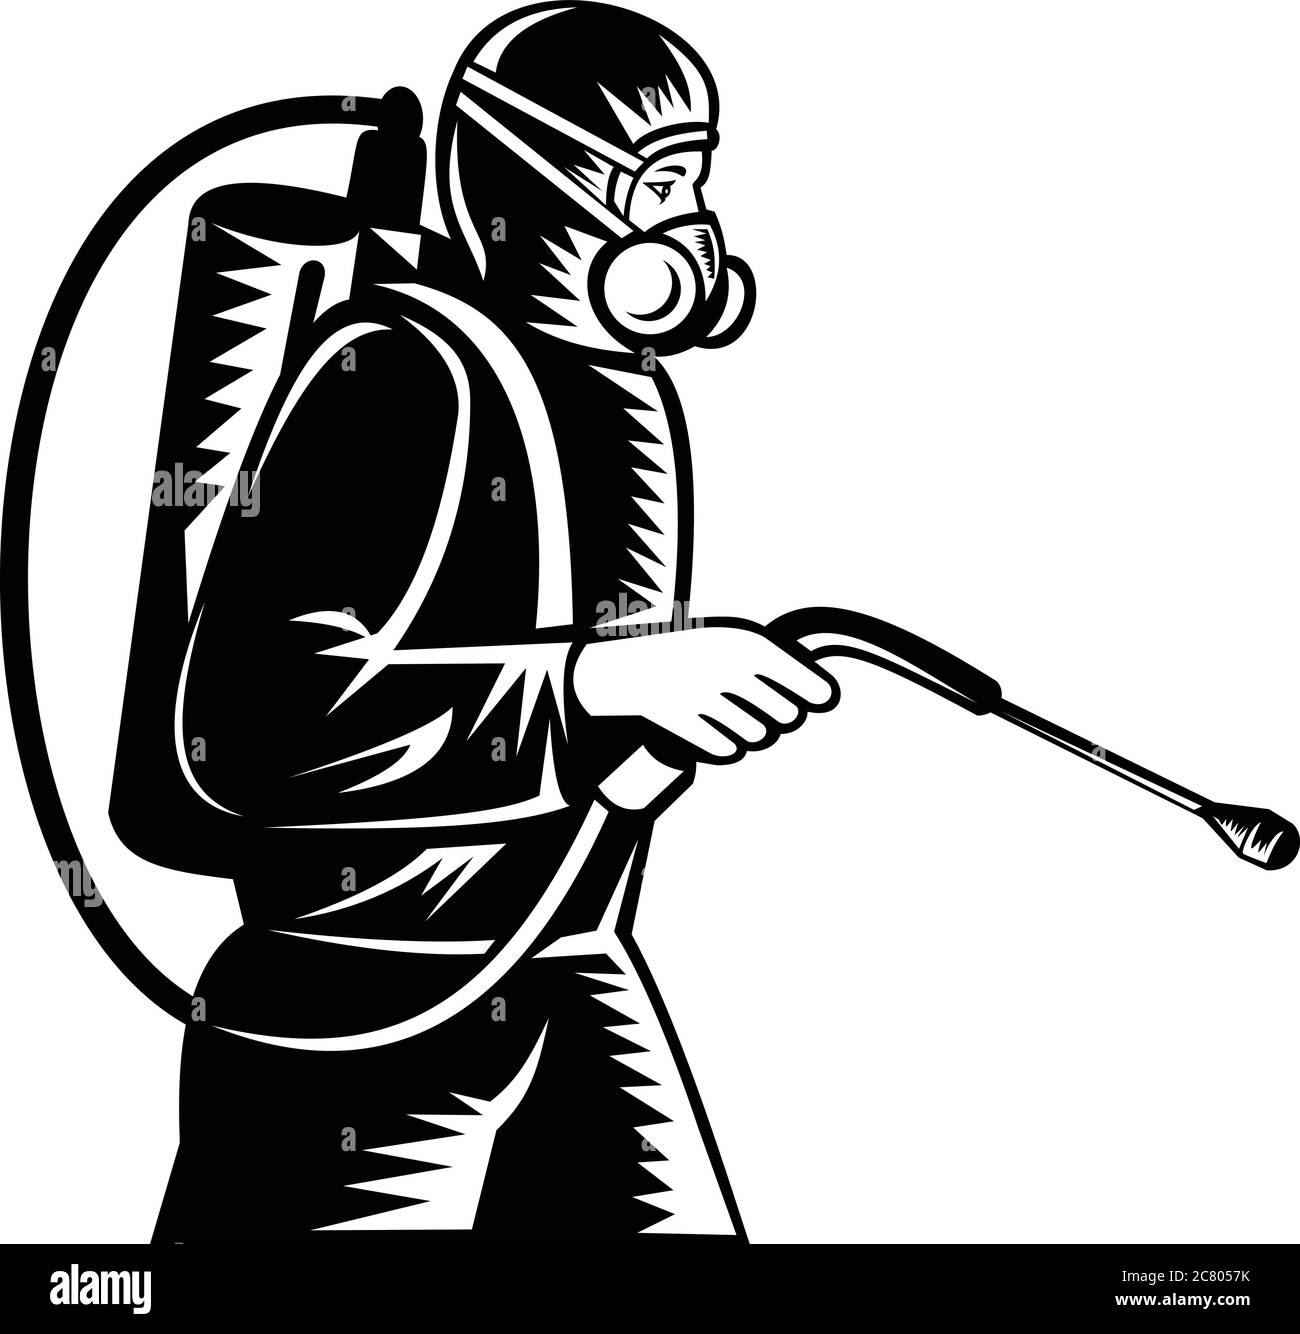 Black and white illustration of pest control exterminator spraying side view on isolated background done in retro woodcut style. Stock Vector